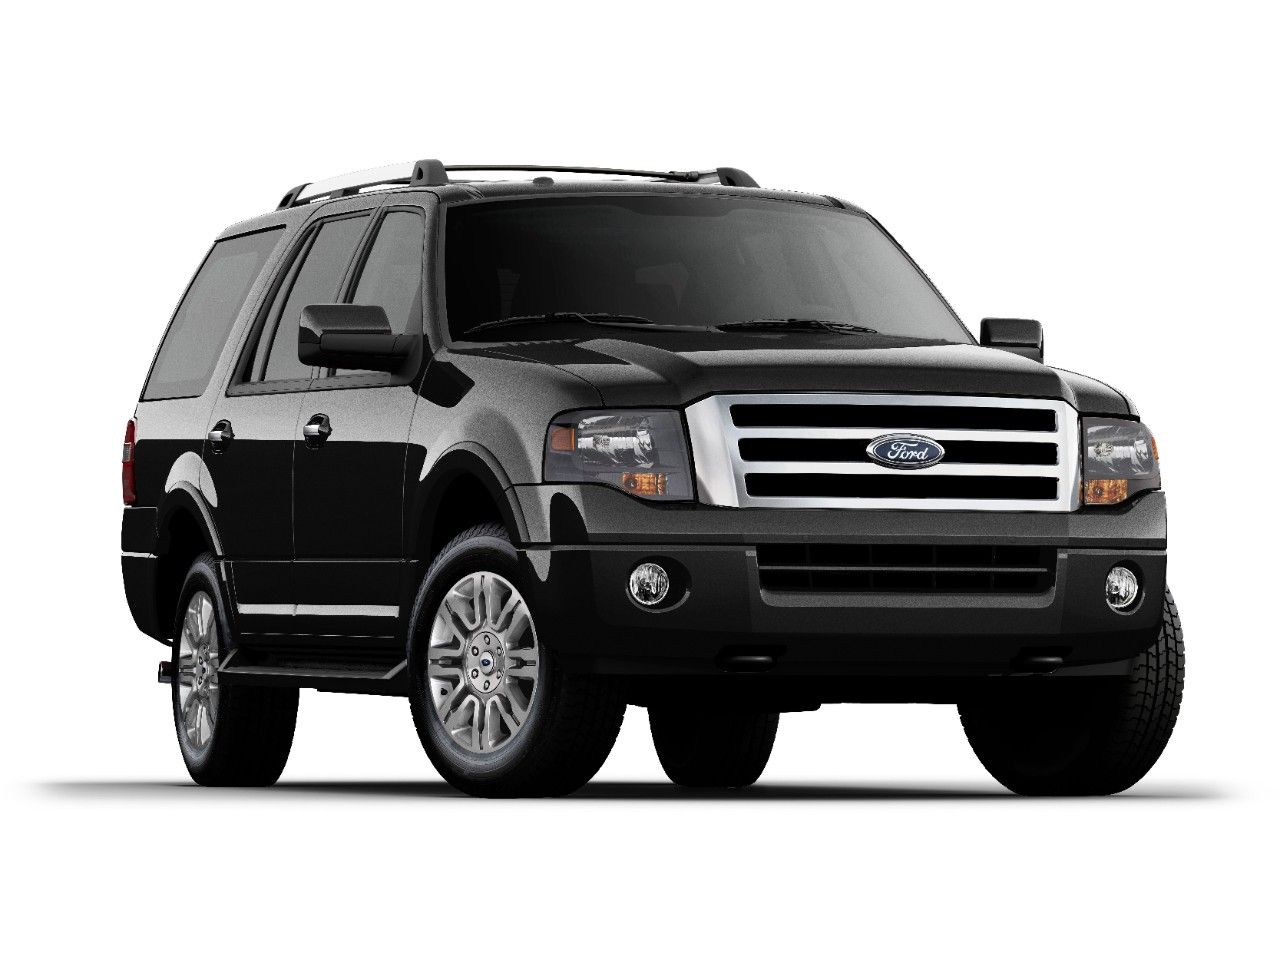 Ford Expedition Picture, Photo .topspeed.com